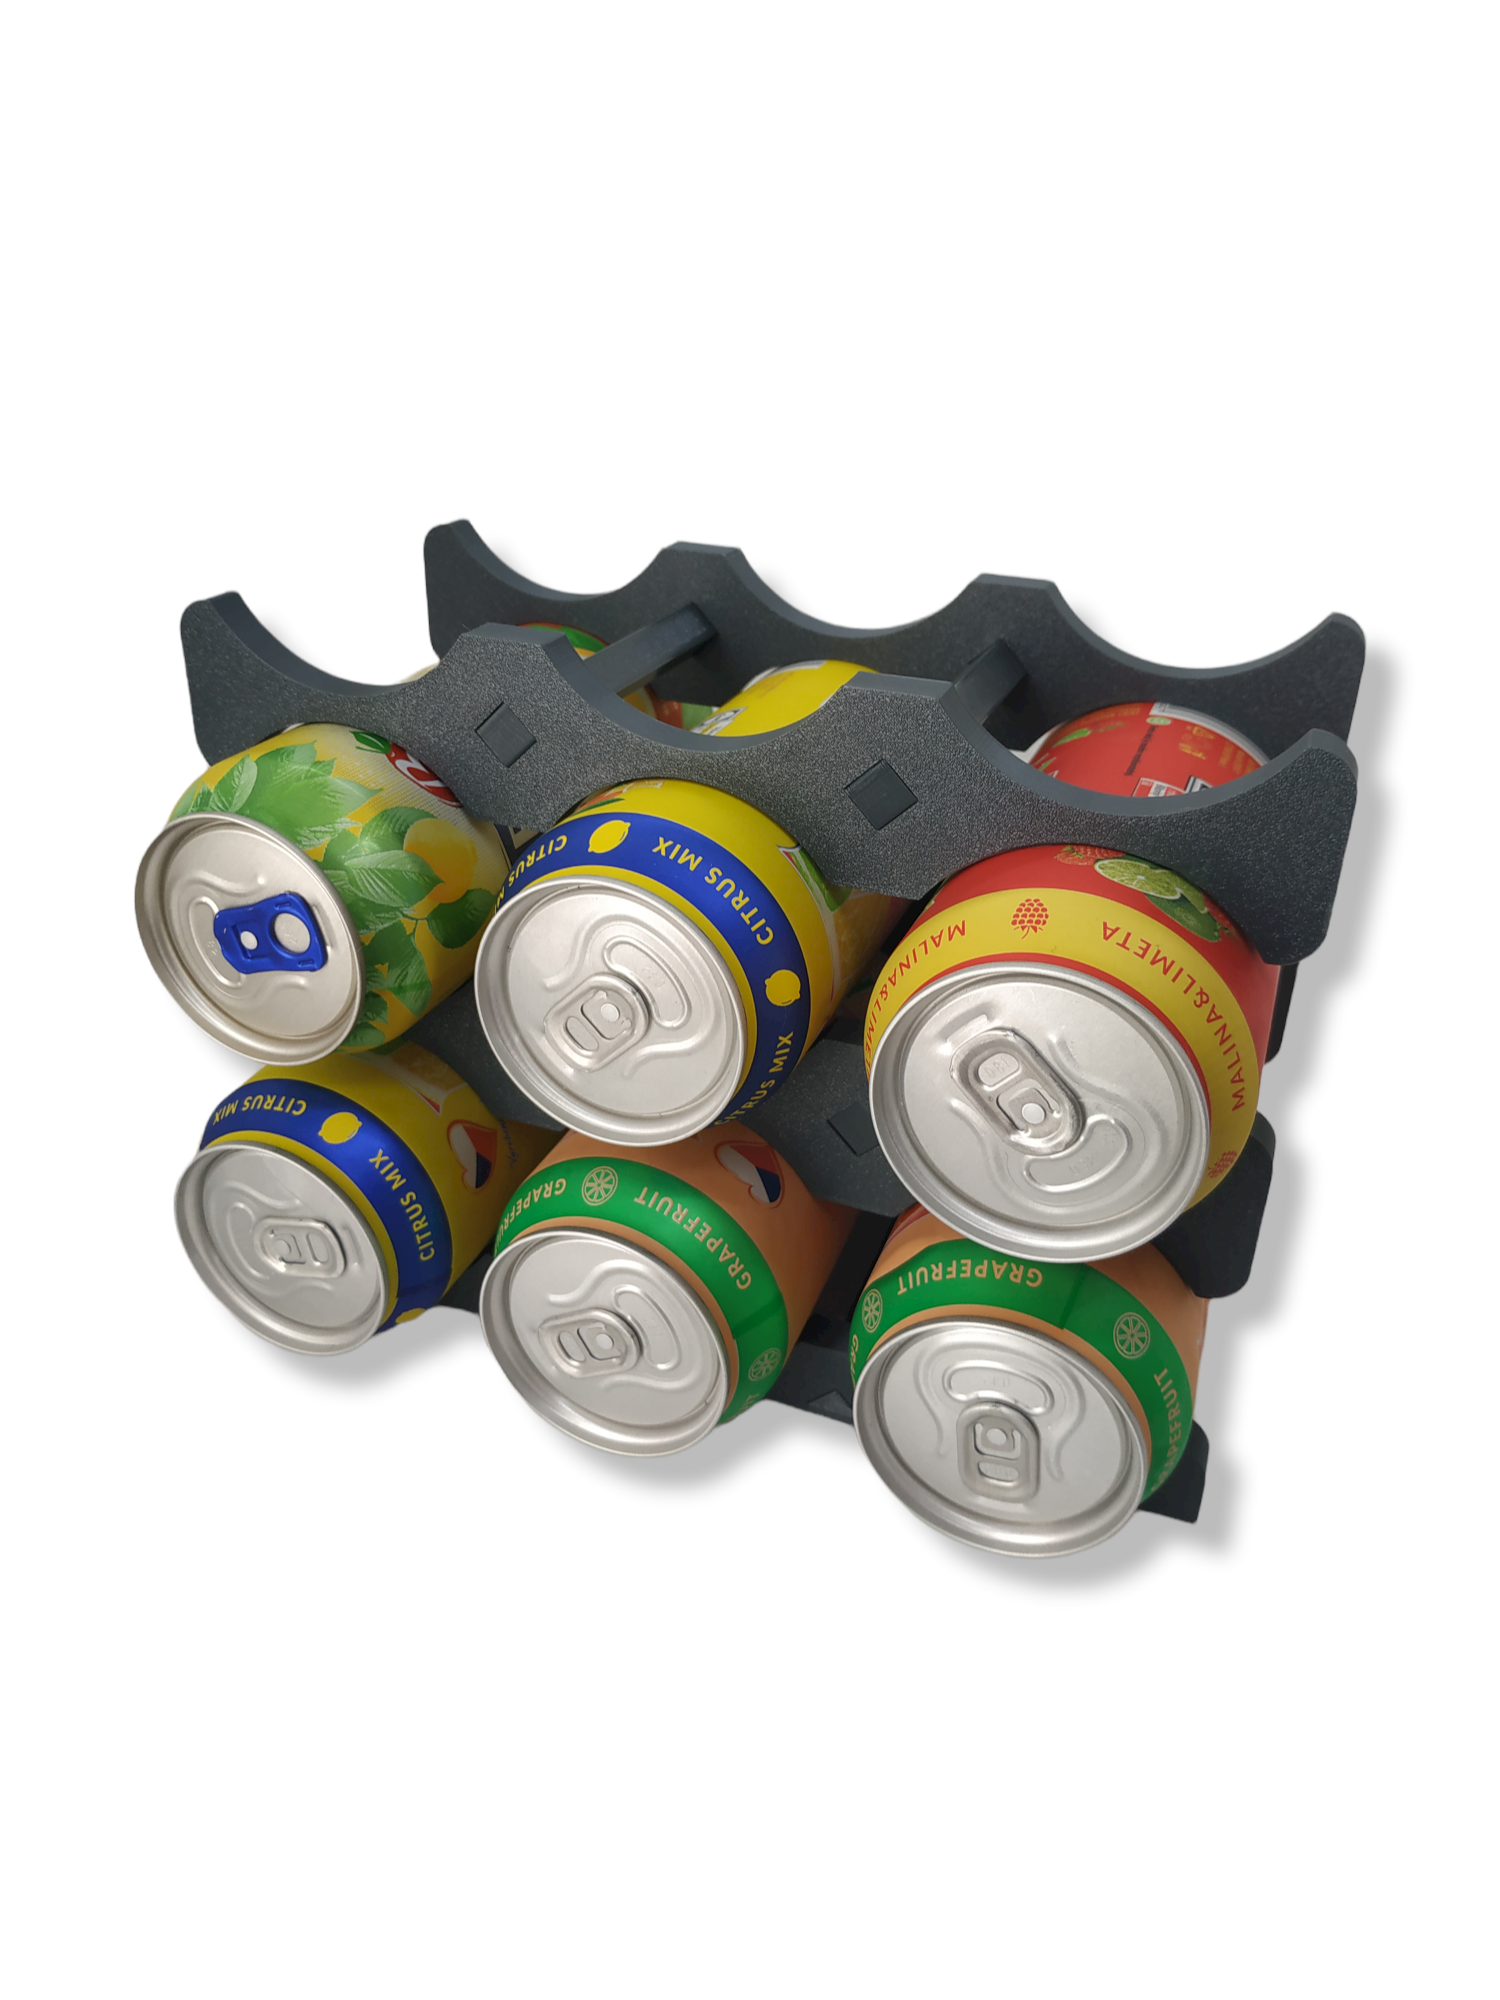 Stackable beer and bottle organizer